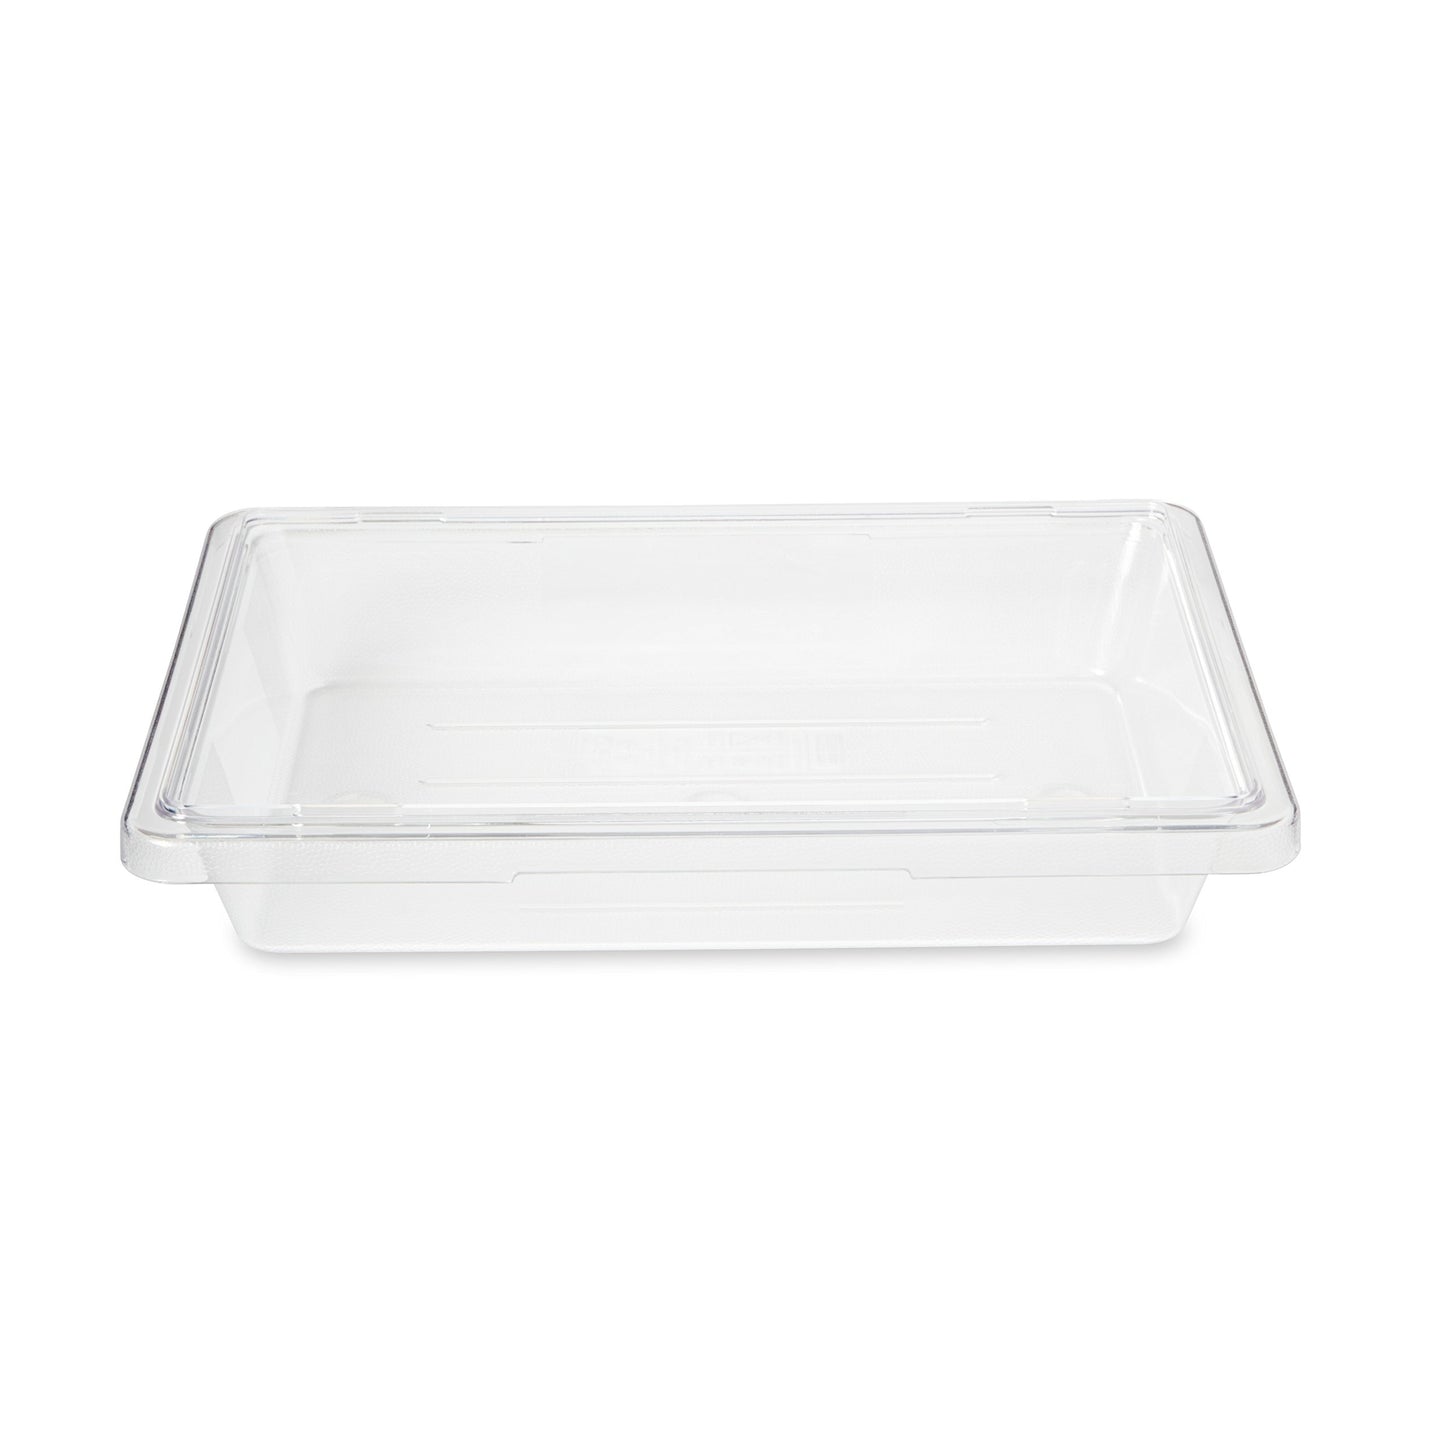 Rubbermaid Commercial Products Food Storage Box/Tote for Restaurant/Kitchen/Cafeteria, 2 Gallon, Clear (FG330700CLR) Lid sold separately